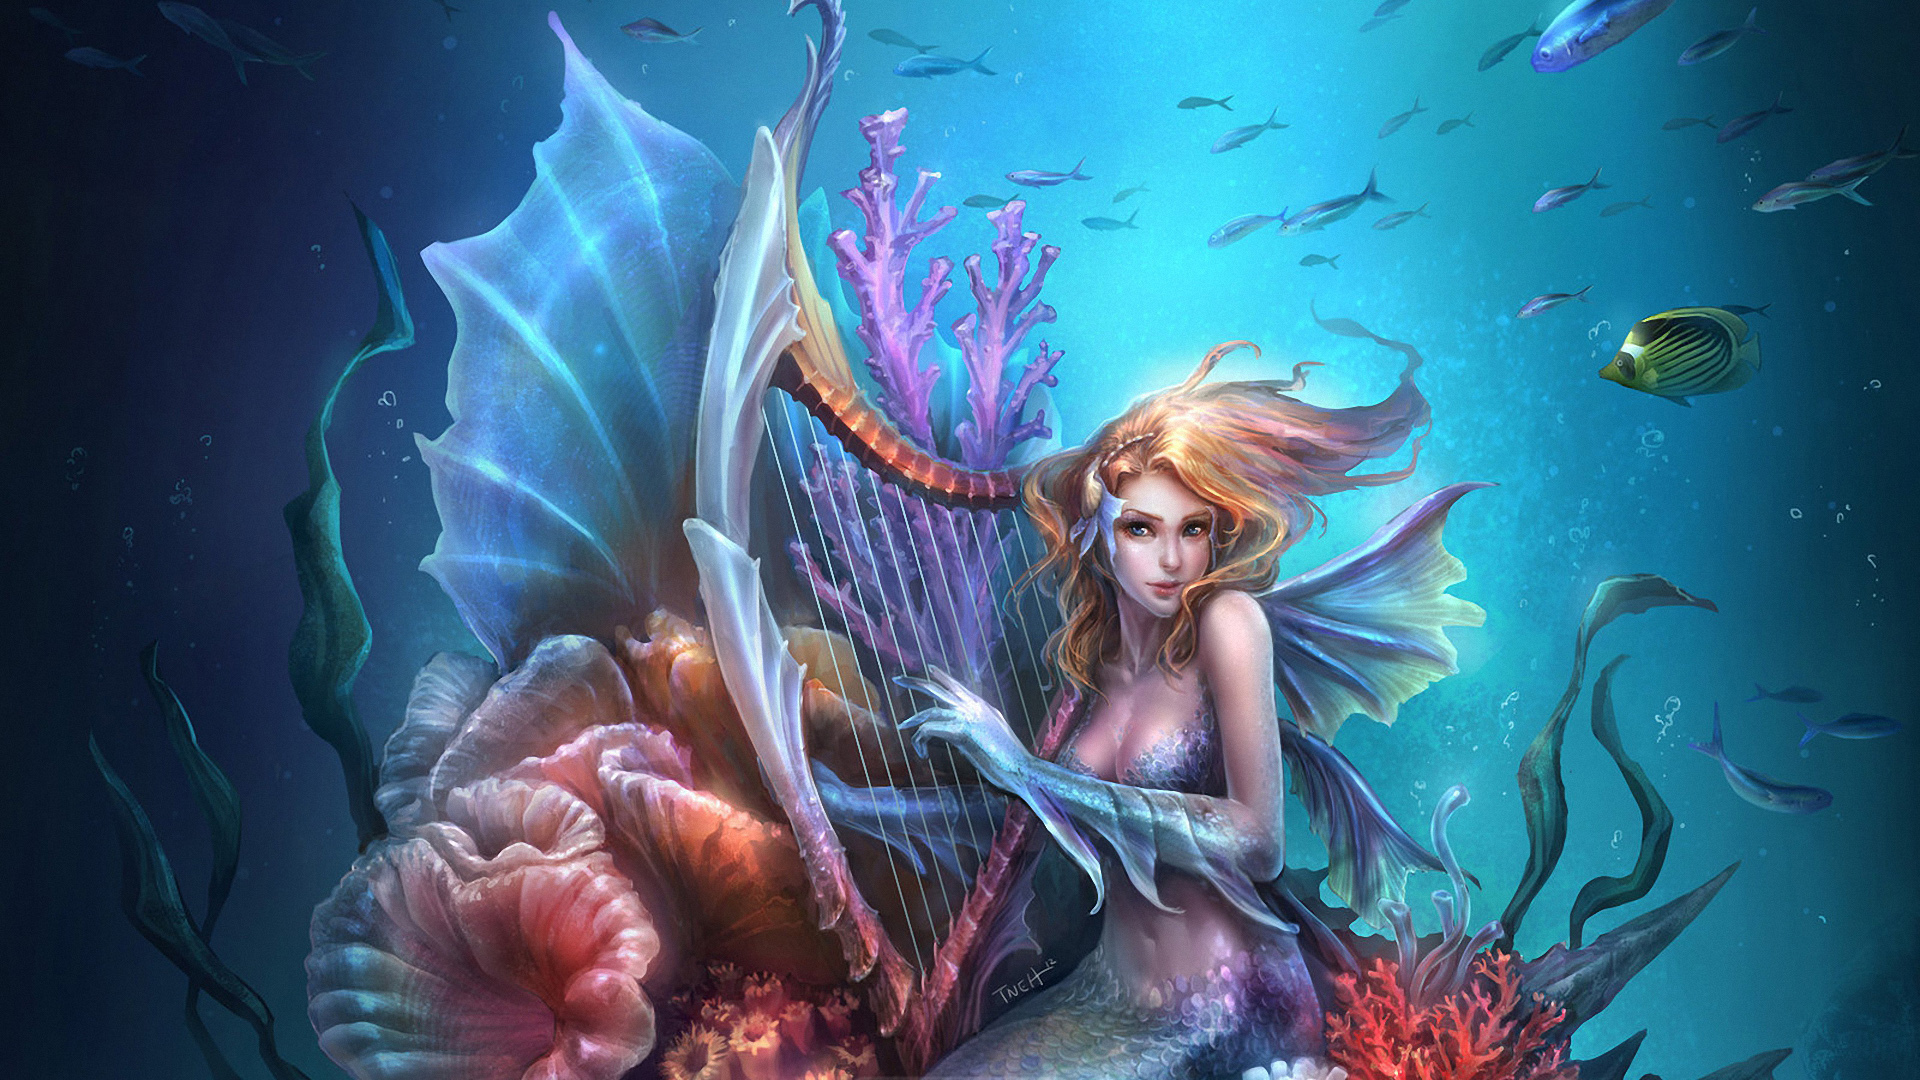 Beautiful Mermaid Fantasy Pictures To Pin